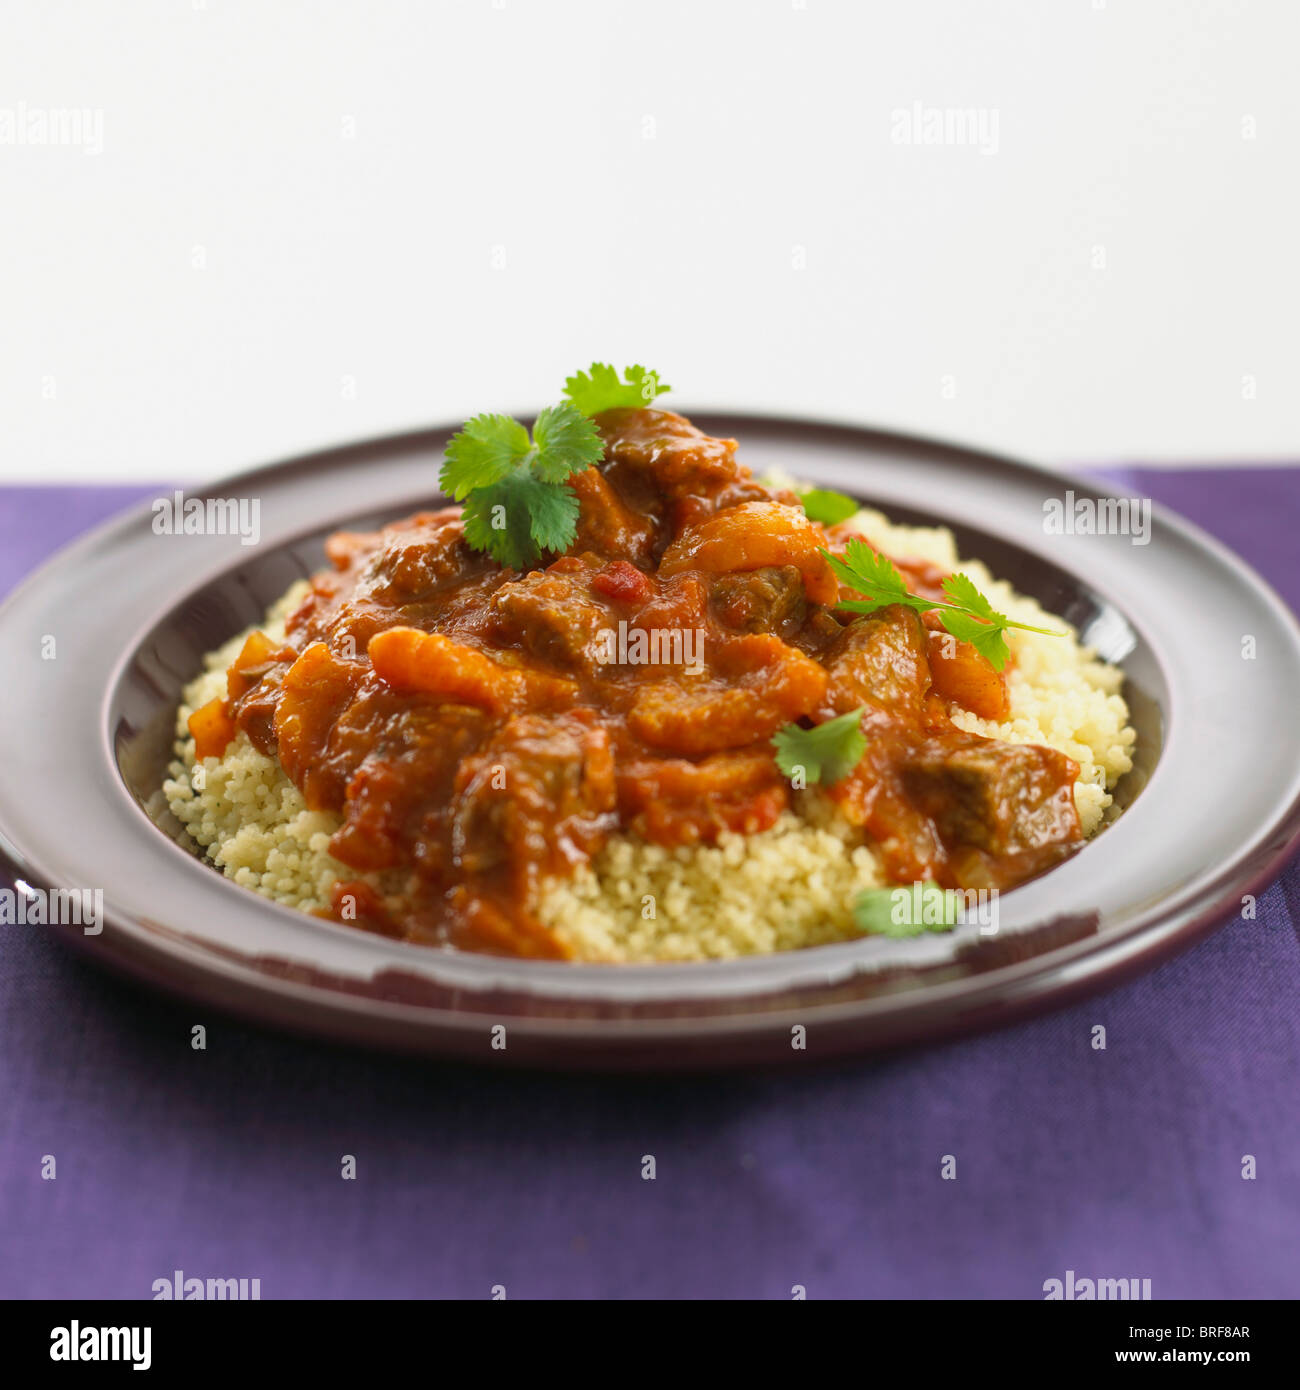 Moroccan lamb tagine with couscous, close-up Stock Photo